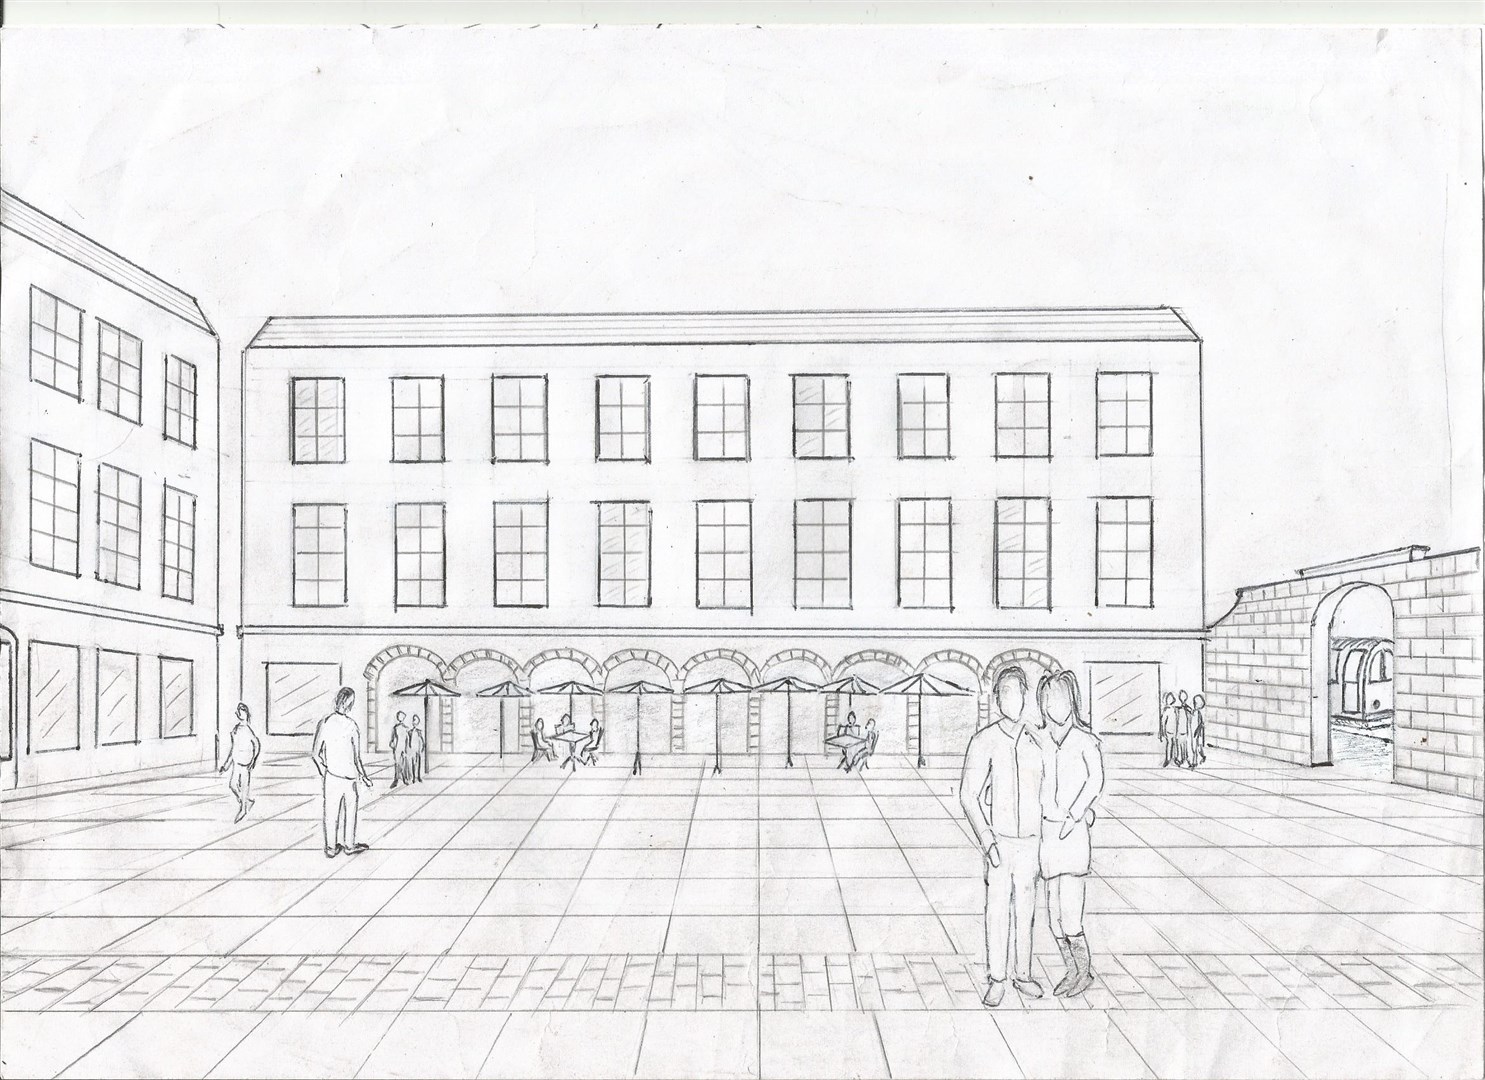 Mark Smyth's sketch for his proposed Inverness civic square.